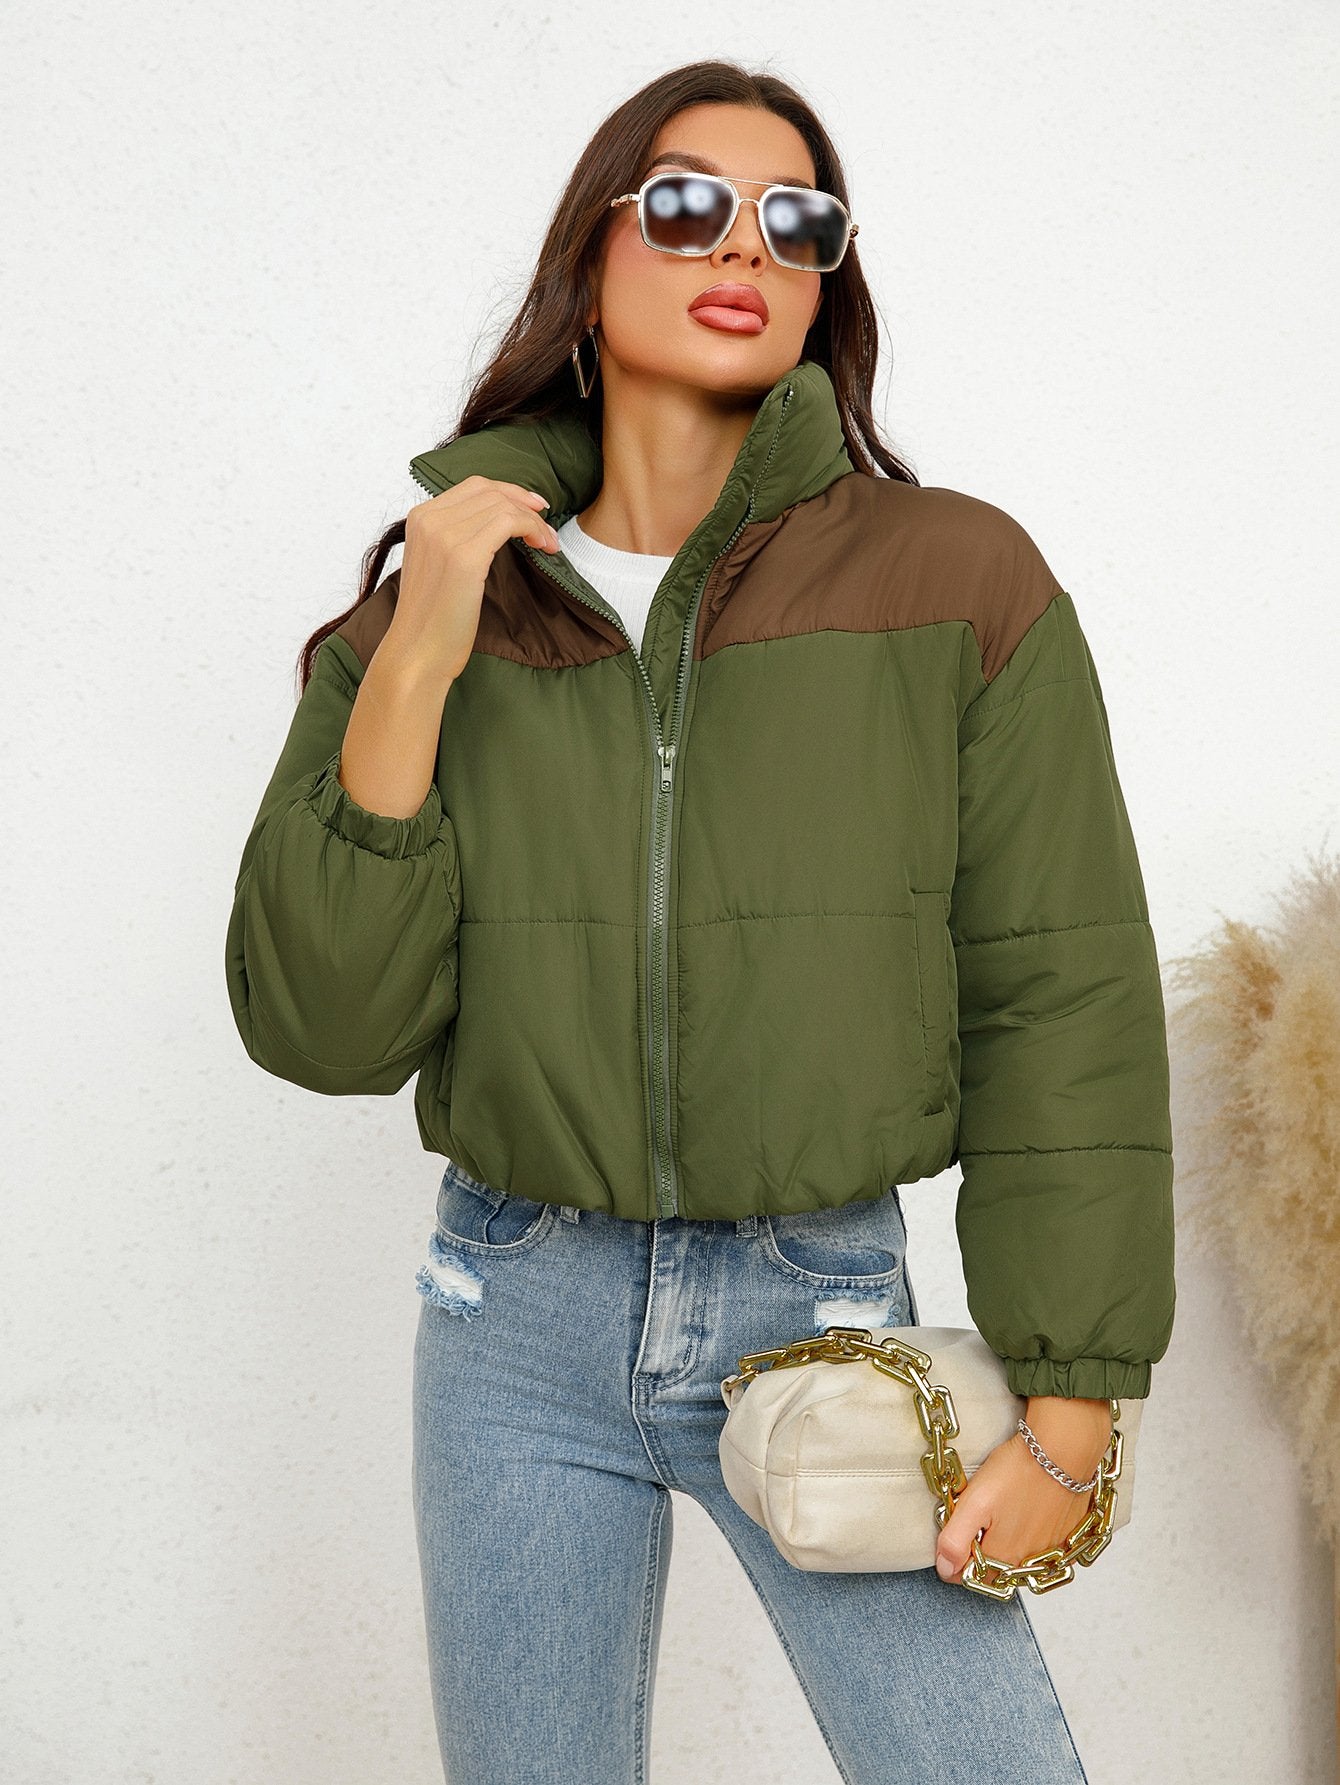 ABYS022023 Autumn And Winter New Solid Color Round Neck Zipper Long Sleeve Slim Pocket Bread Cotton-padded Jacket